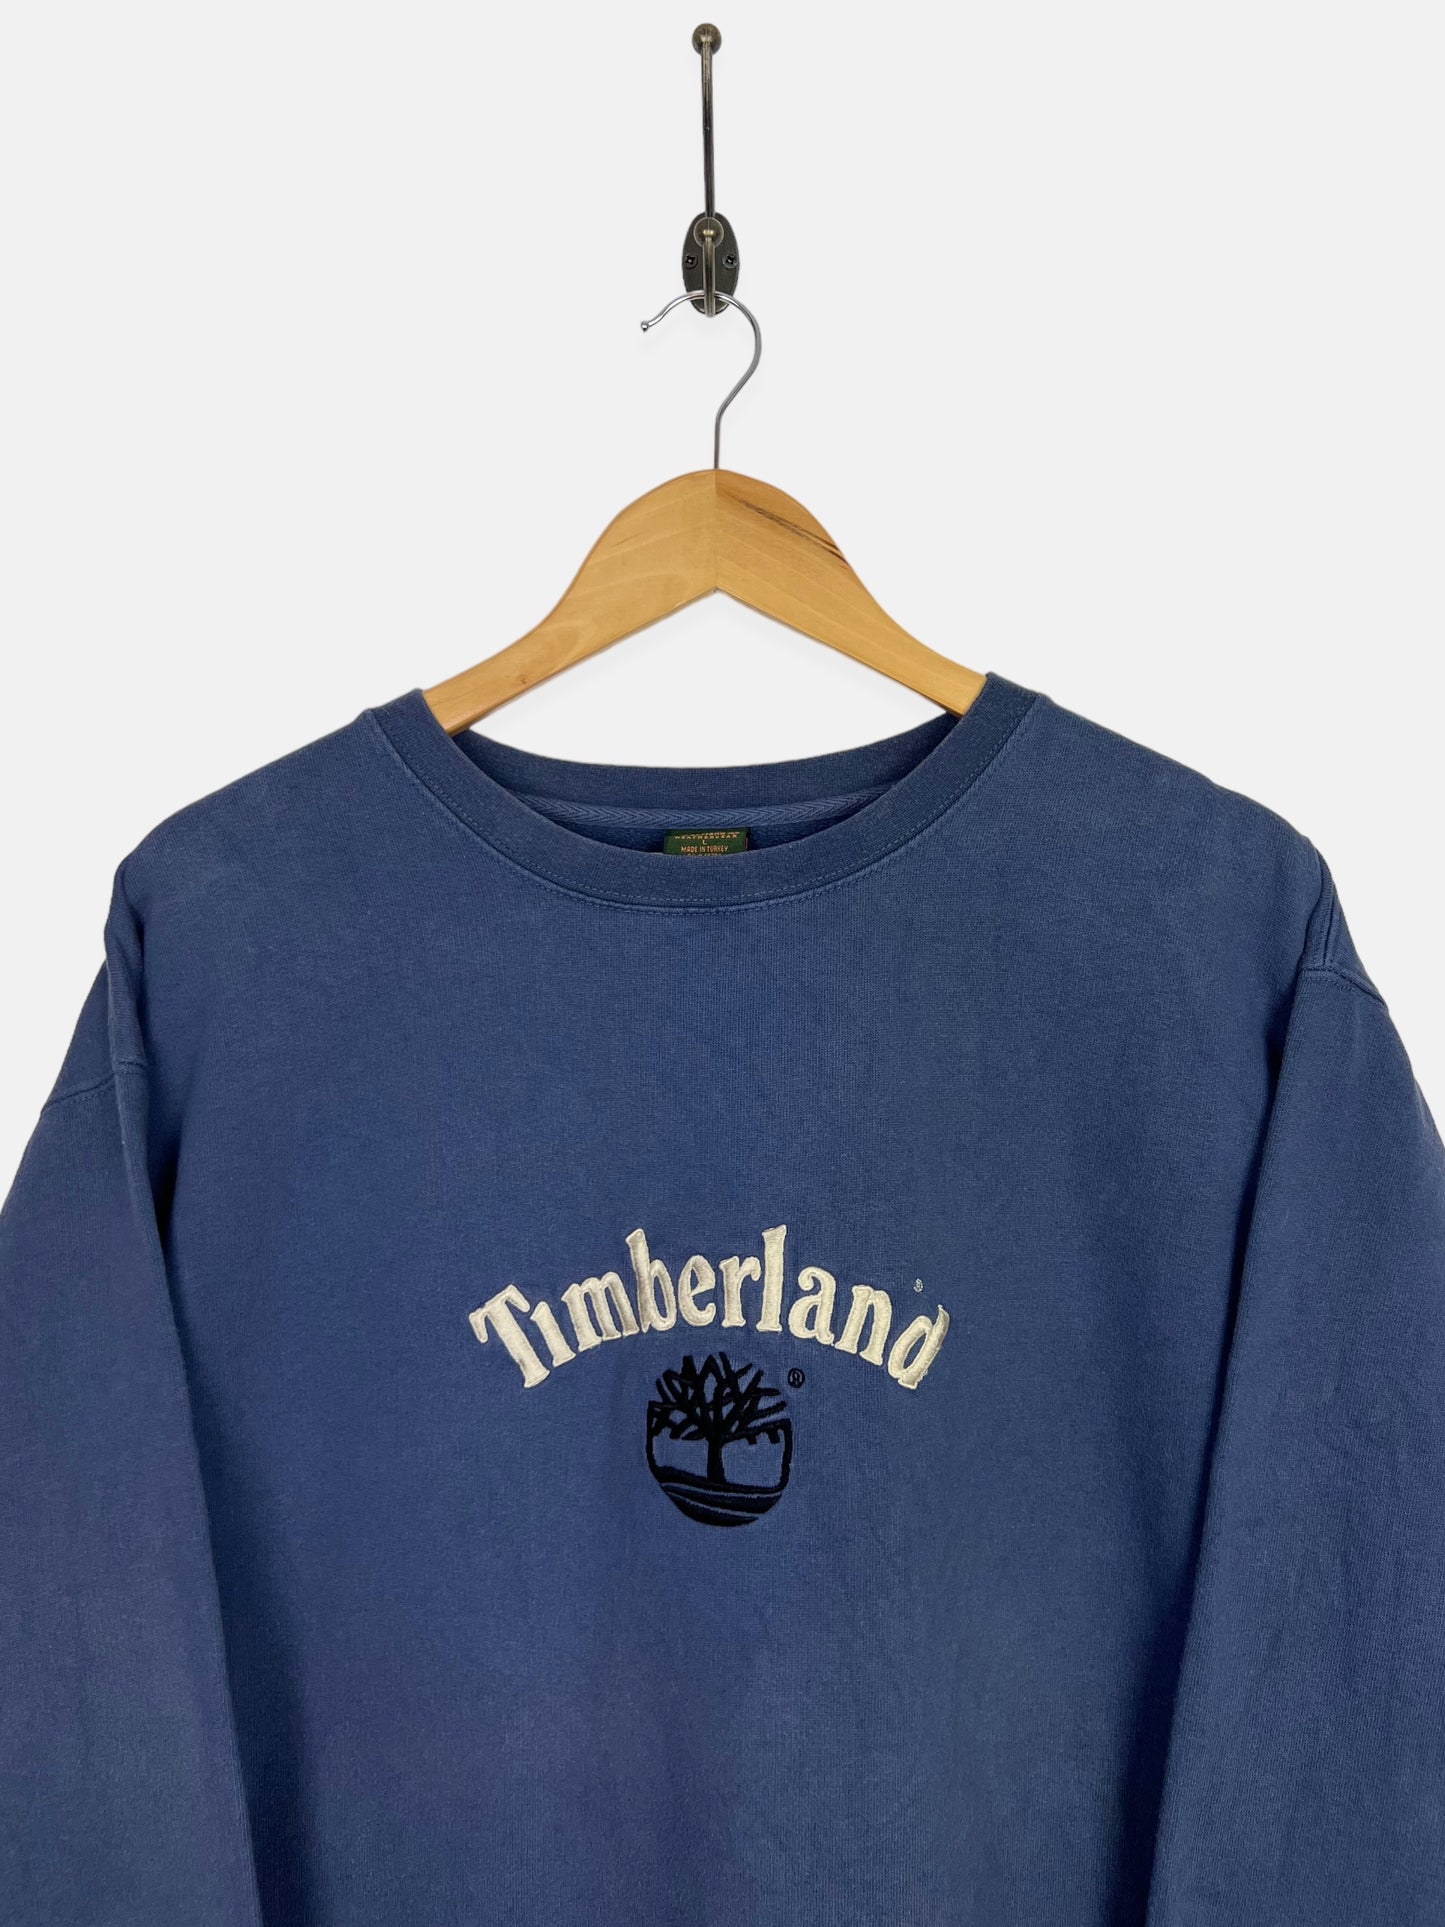 90's Timberland Embroidered Vintage Sweatshirt Size L